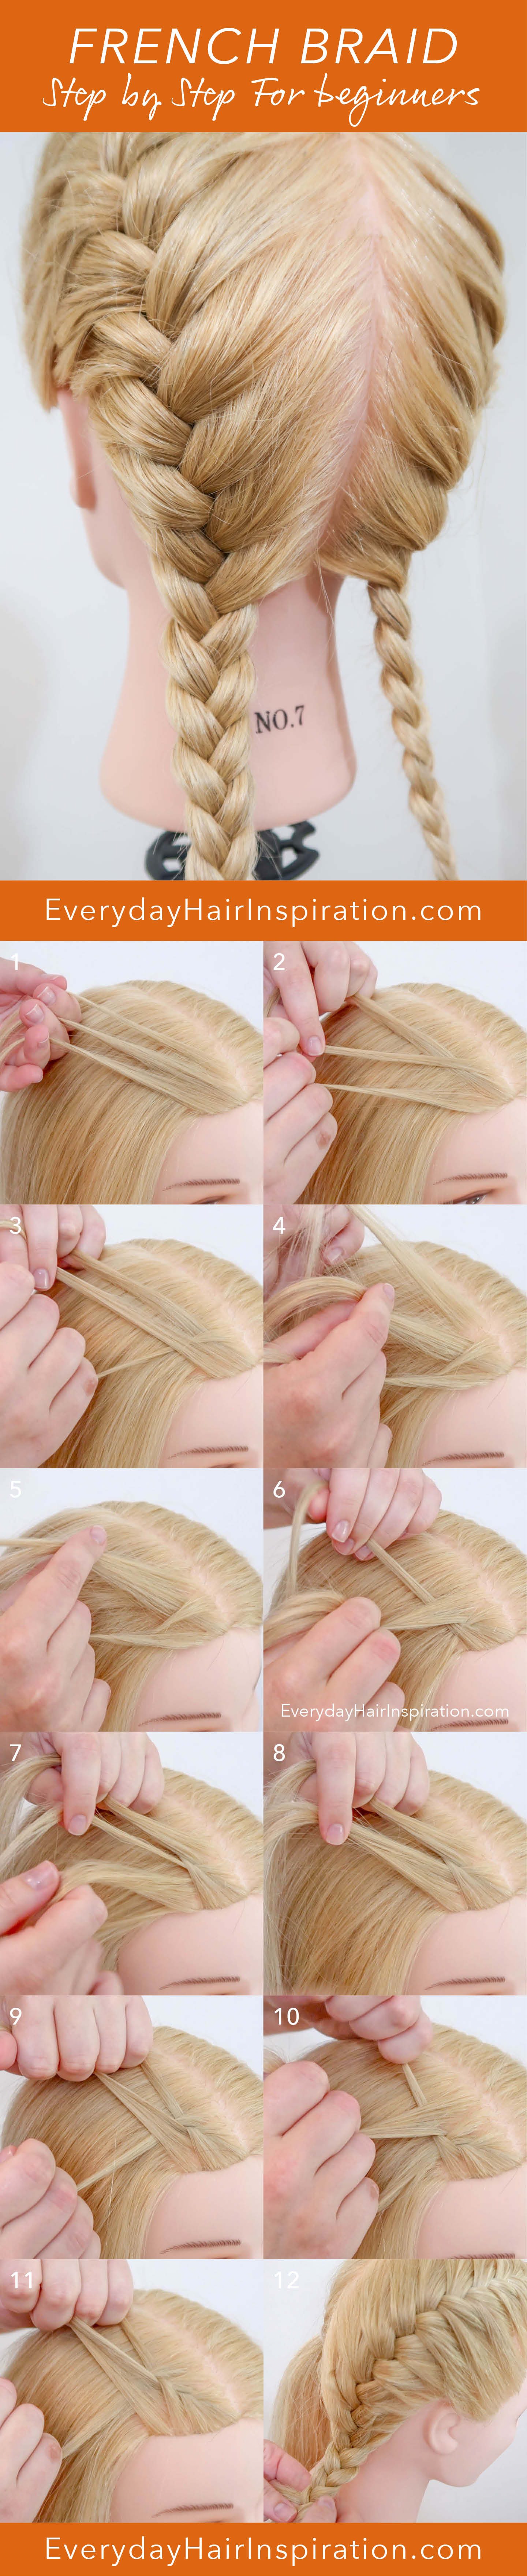 How to french braid for beginners